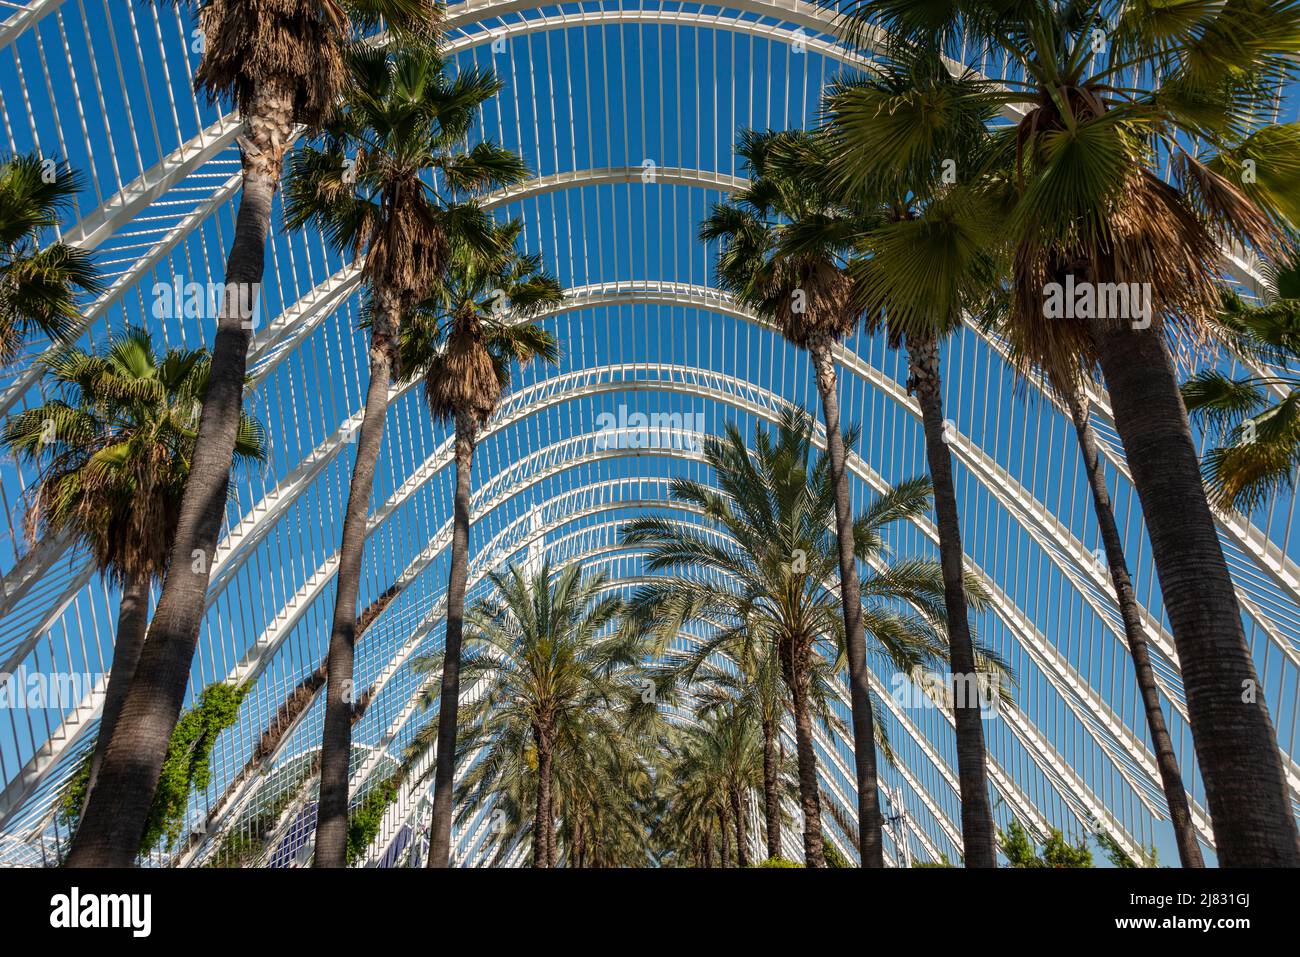 Palm trees under an arched structure, looking up to blue sky. Stock Photo